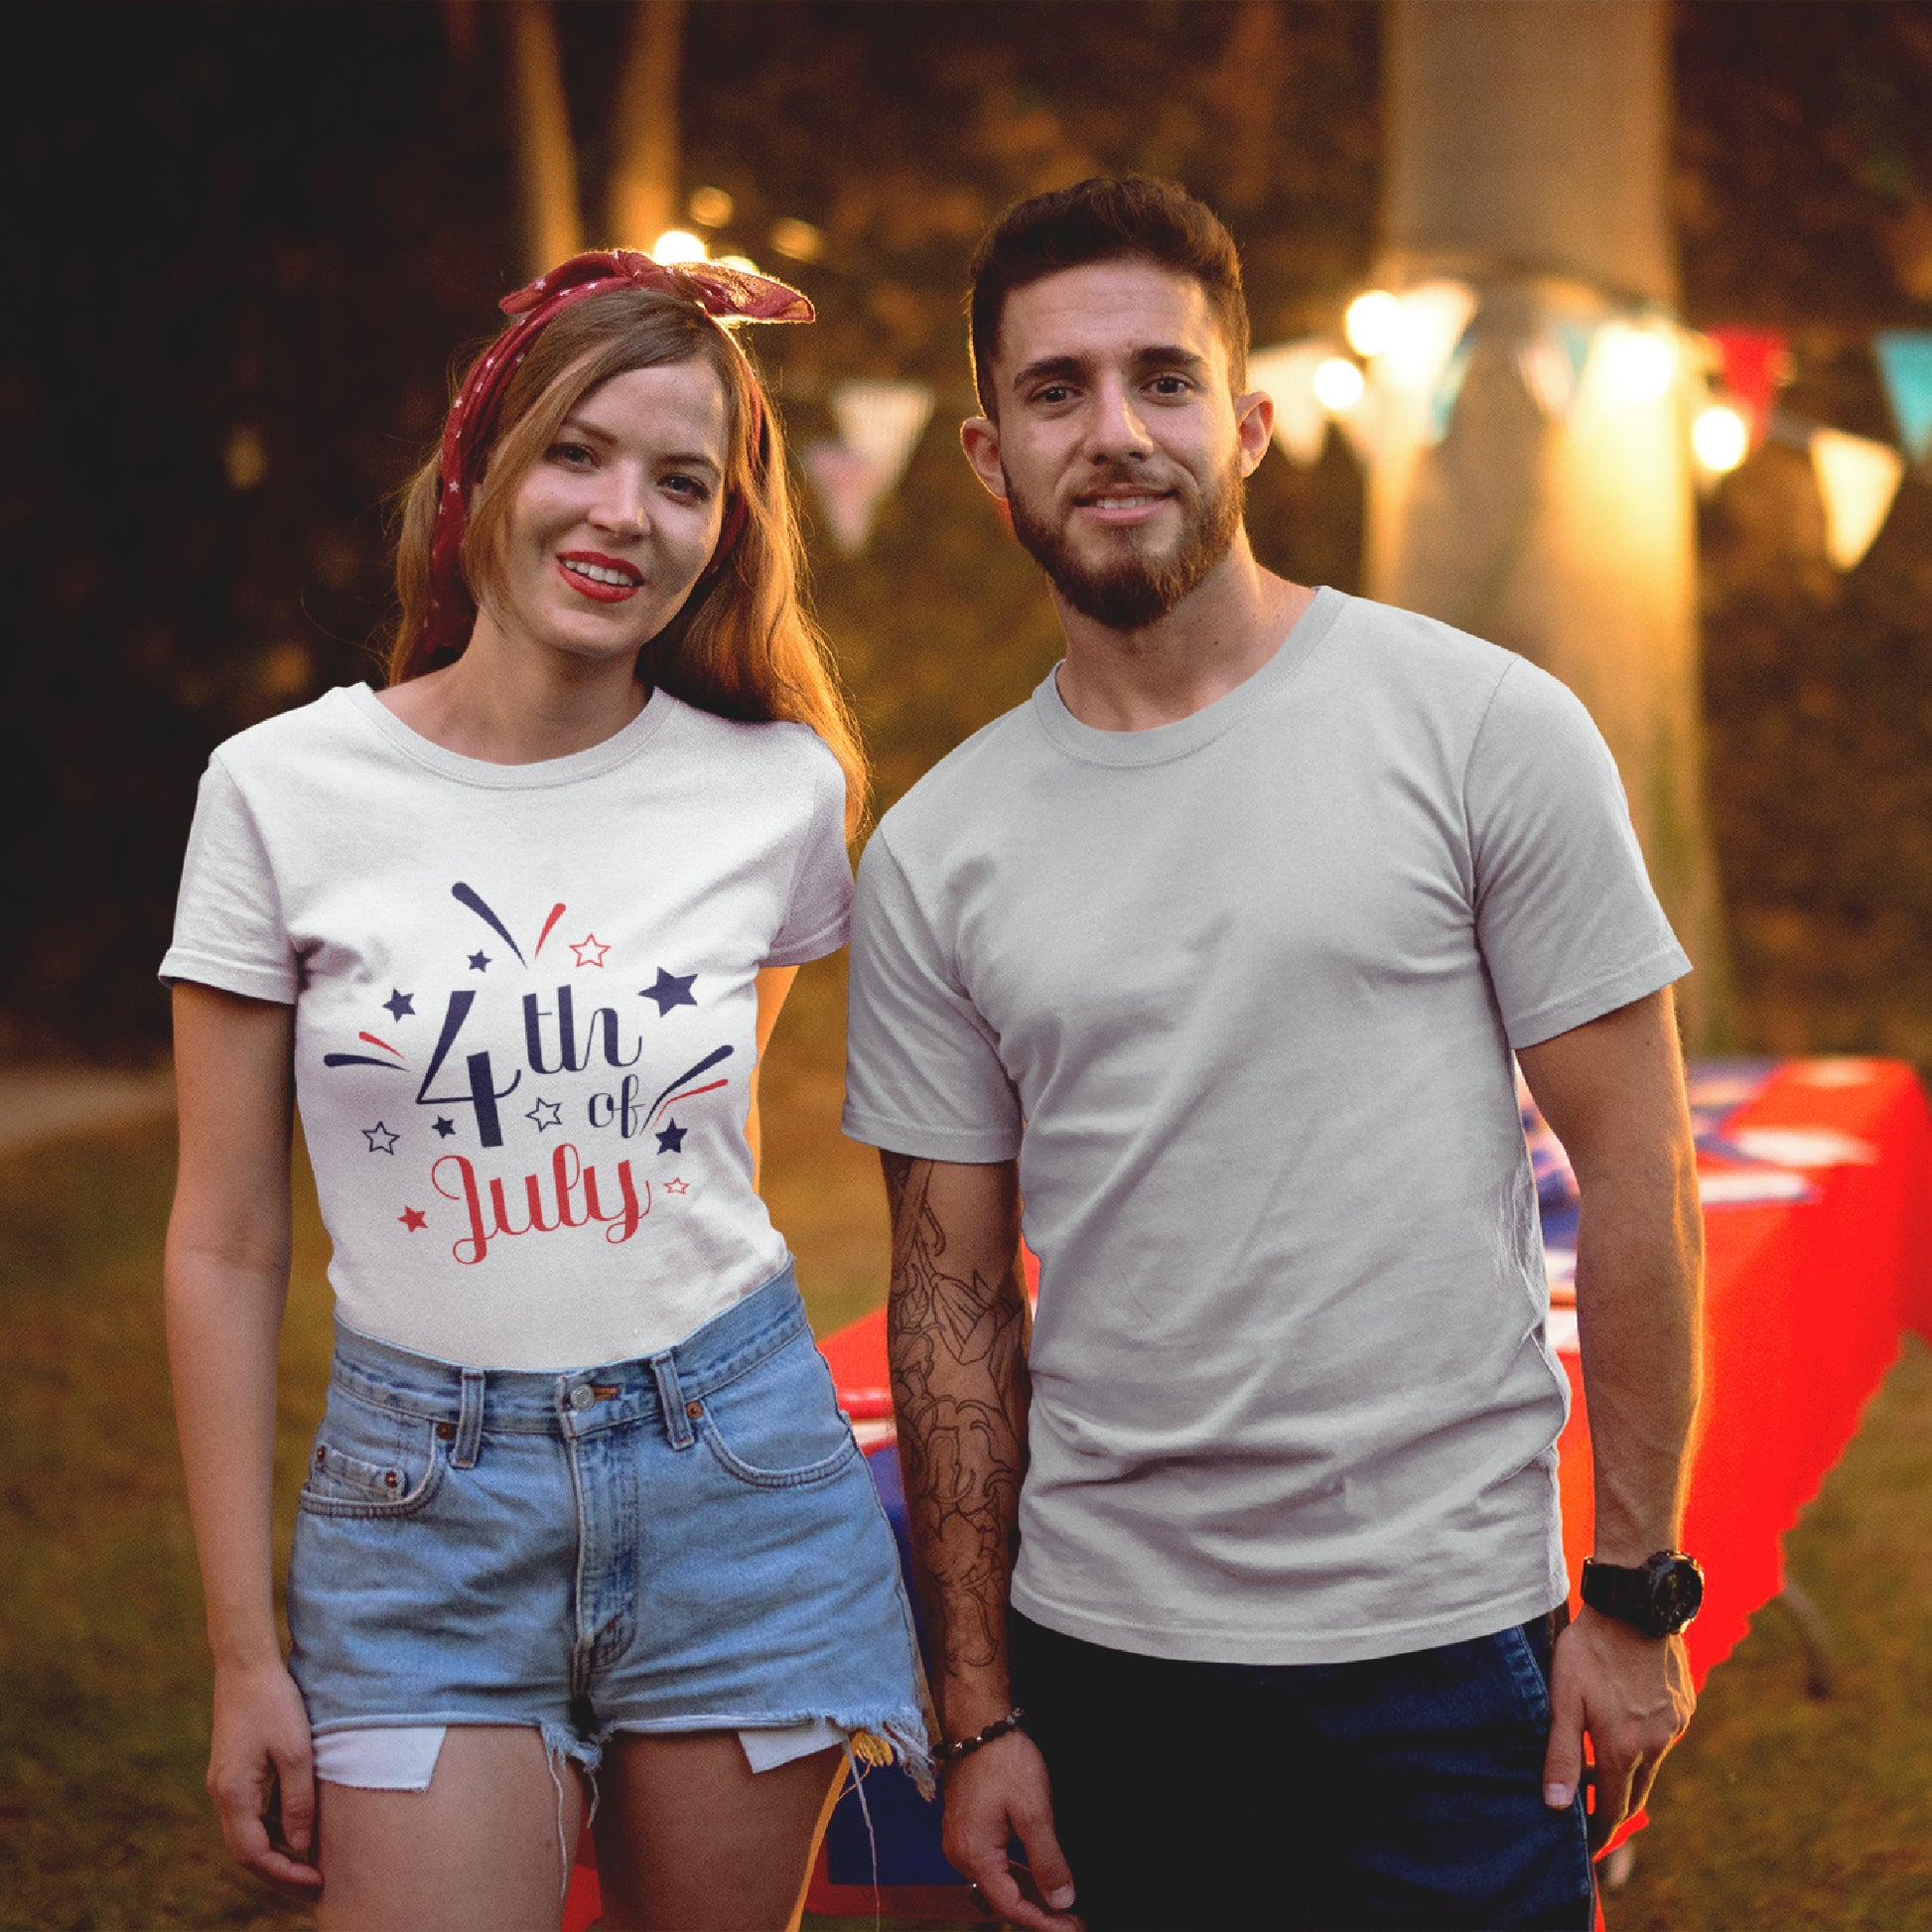 Mock up of a man and woman at an outdoor party where she is wearing the White t-shirt